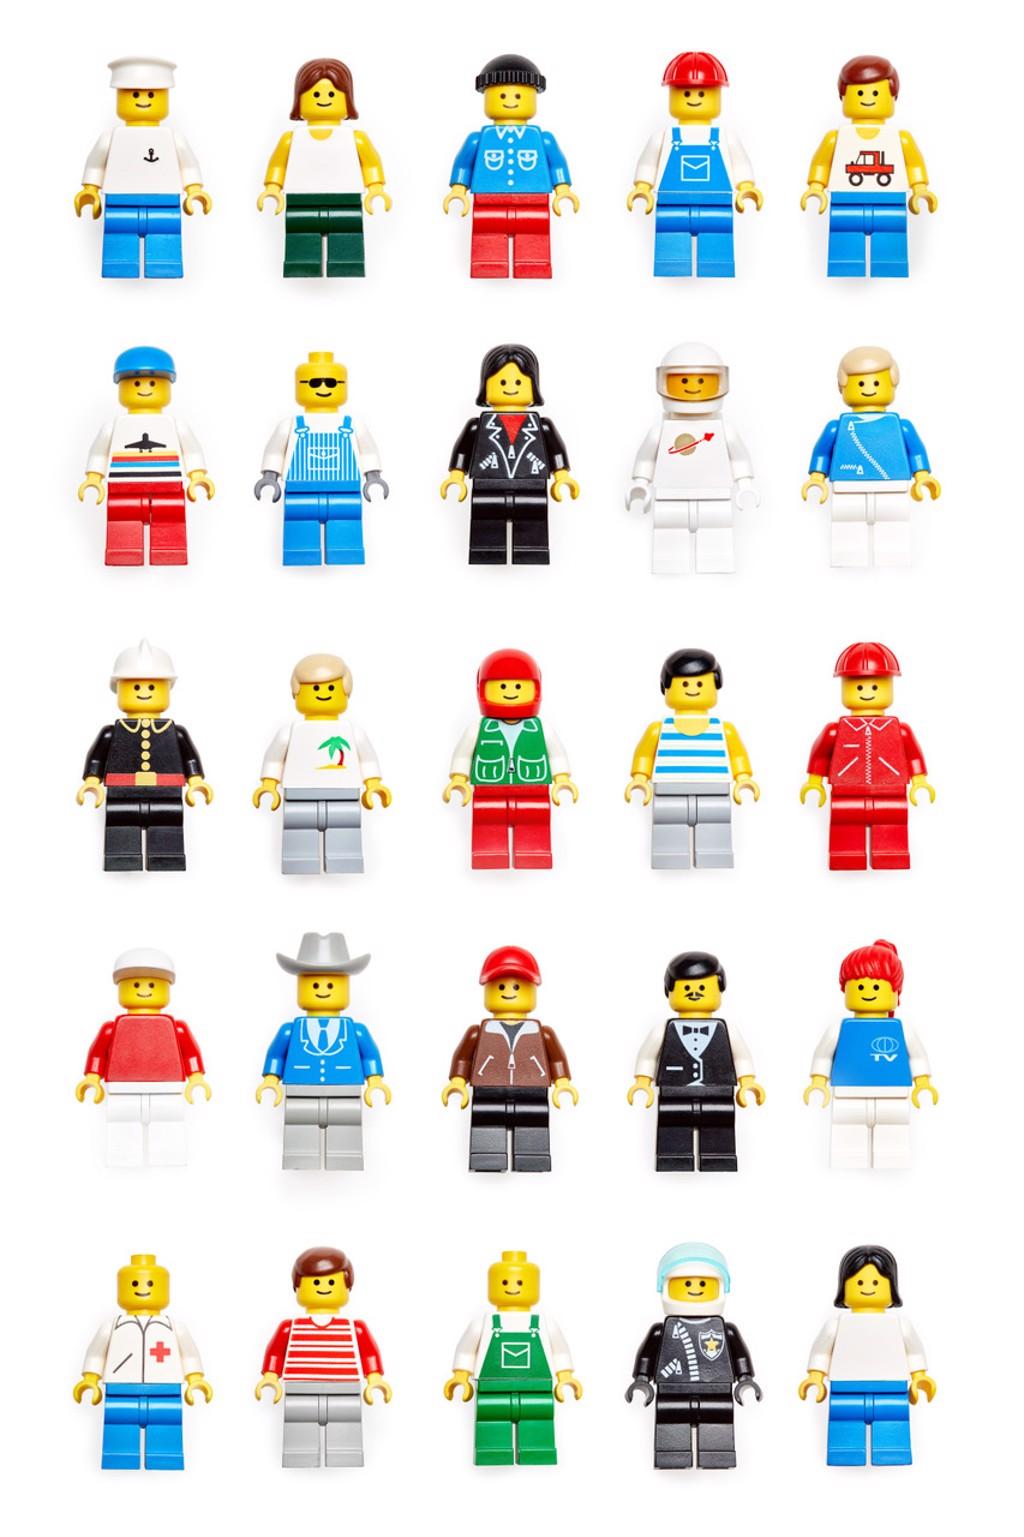 Peter Andrew Lusztyk Color Photograph - Lego People